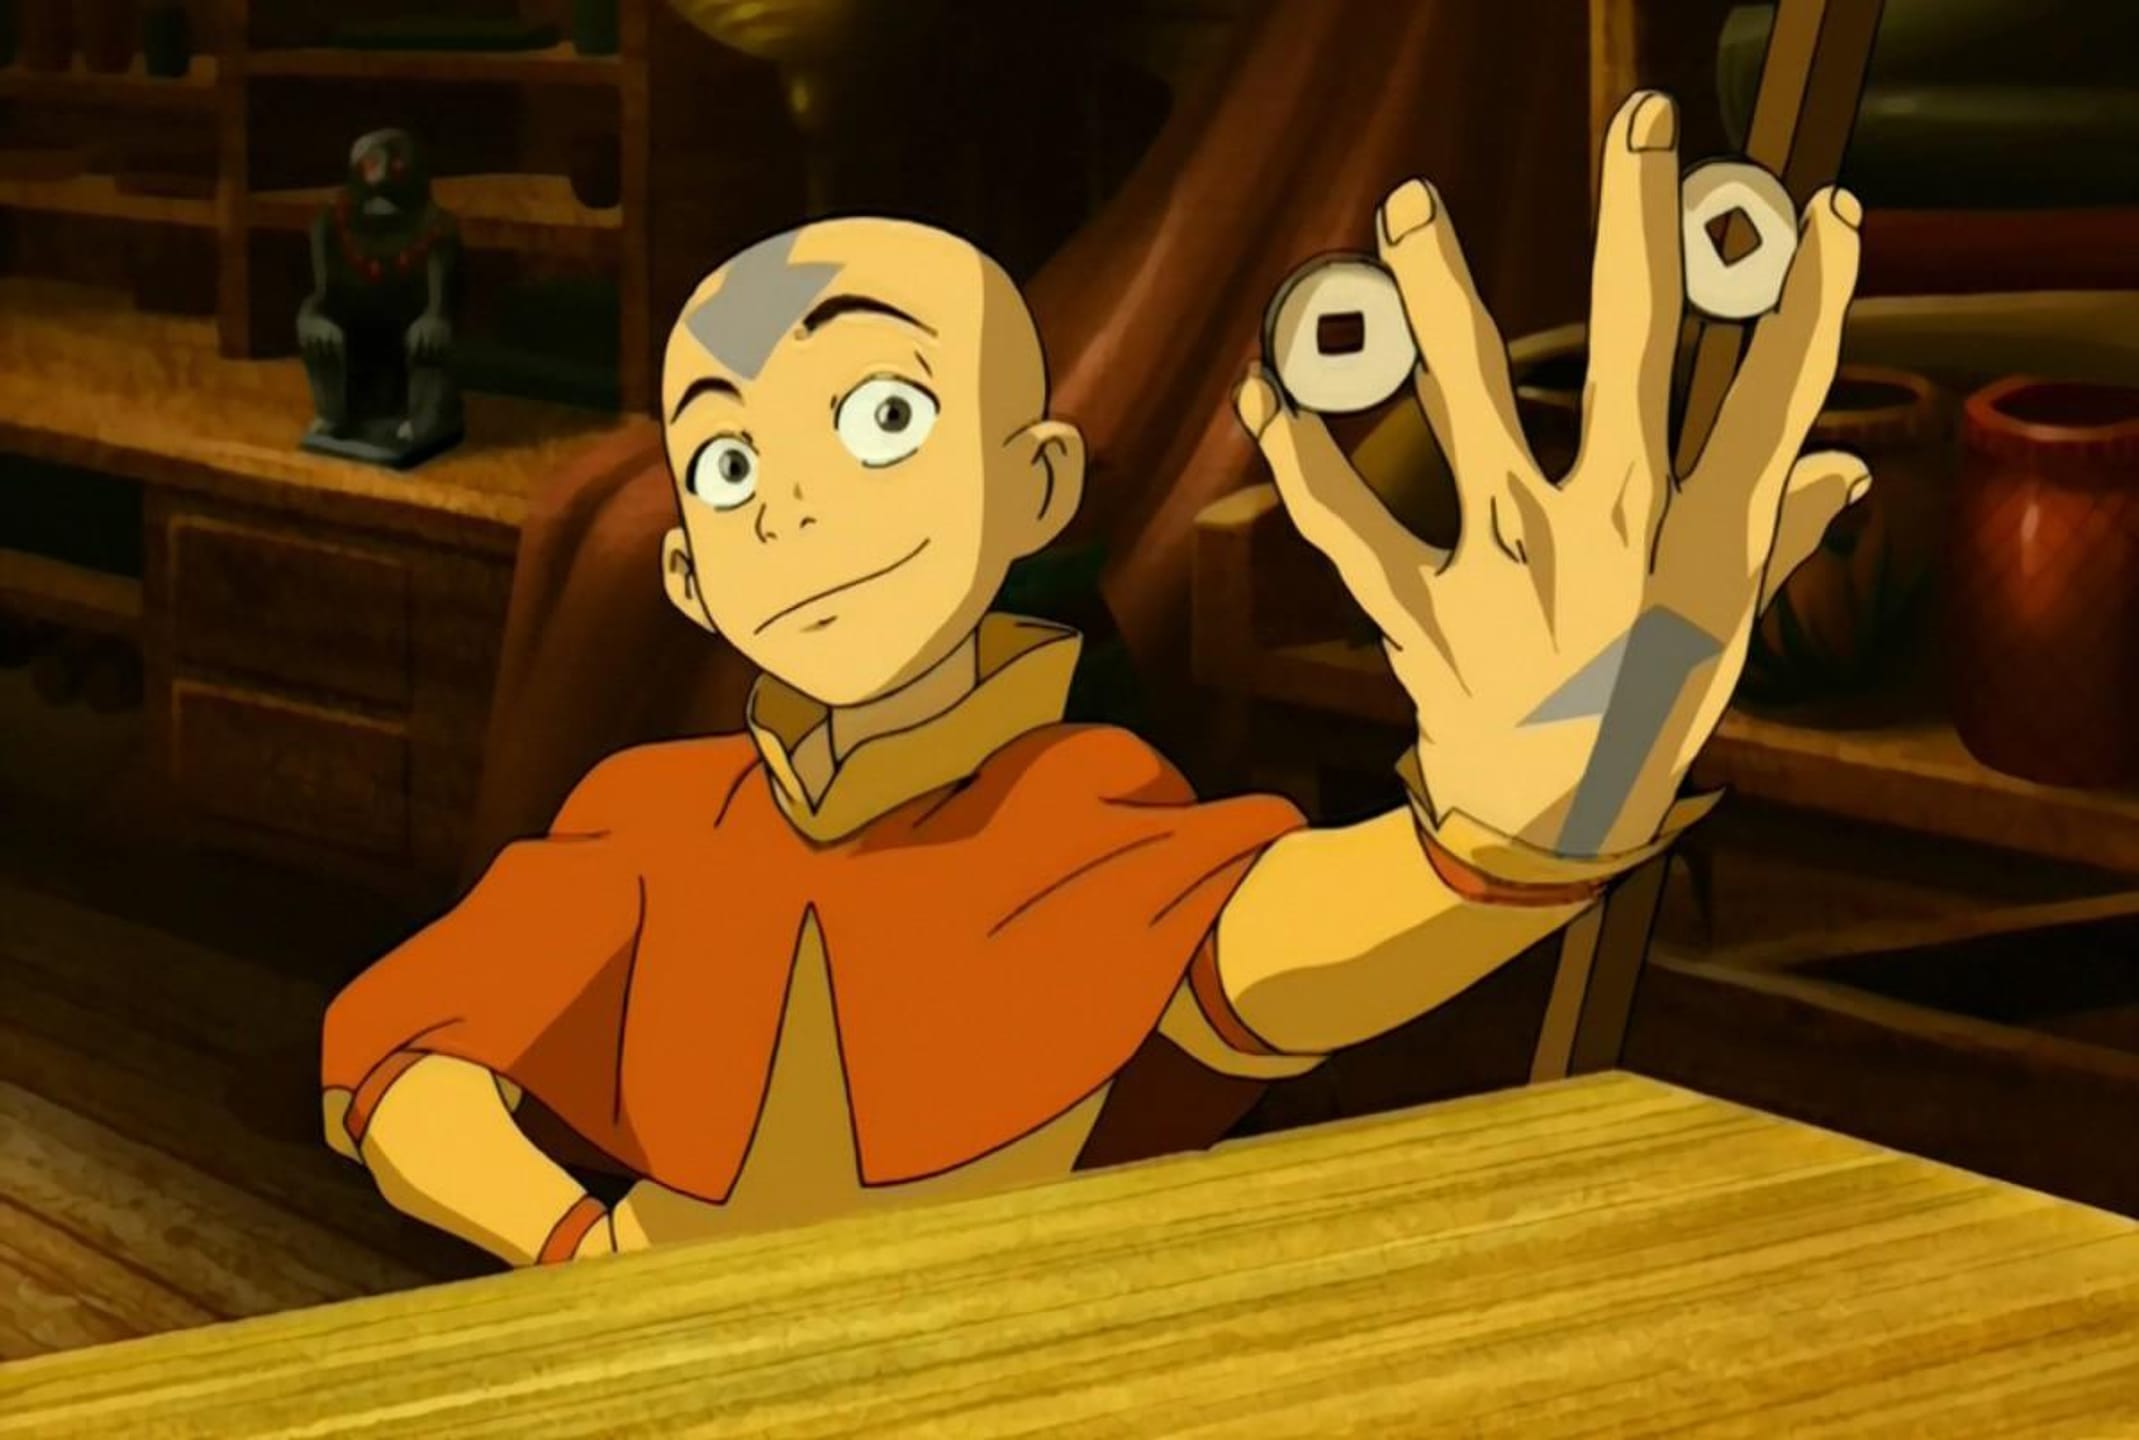 Which Nation From 'Avatar: The Last Airbender' Do You Belong To?